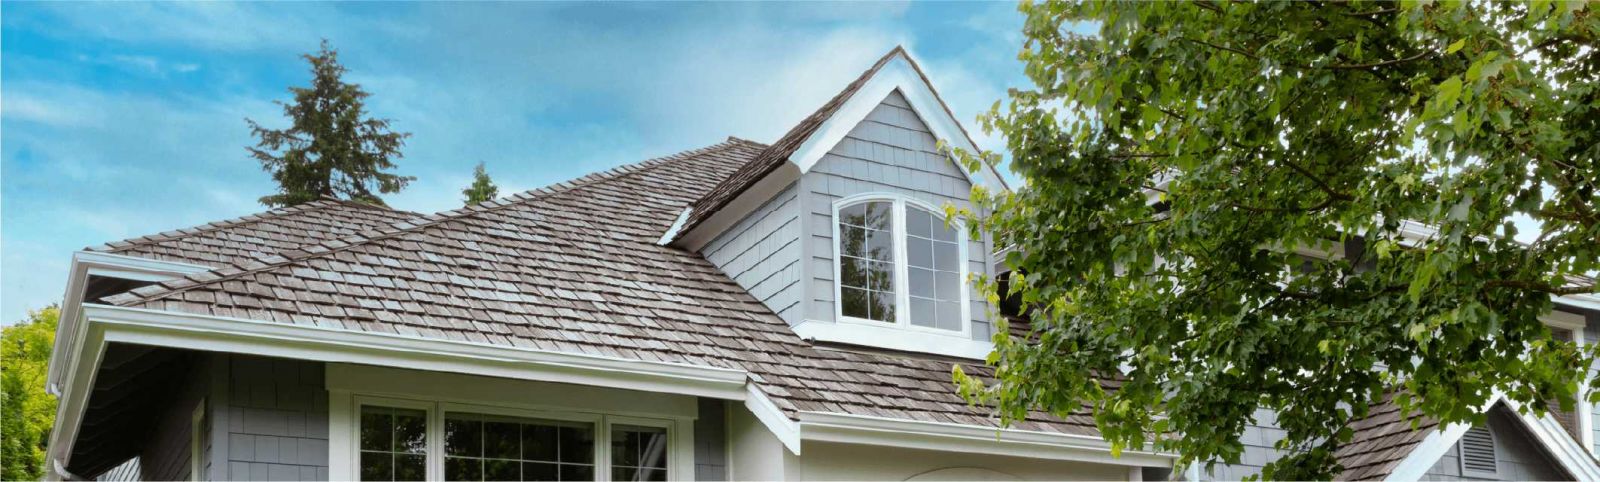 Wolfy's Sunrise Roofing Images